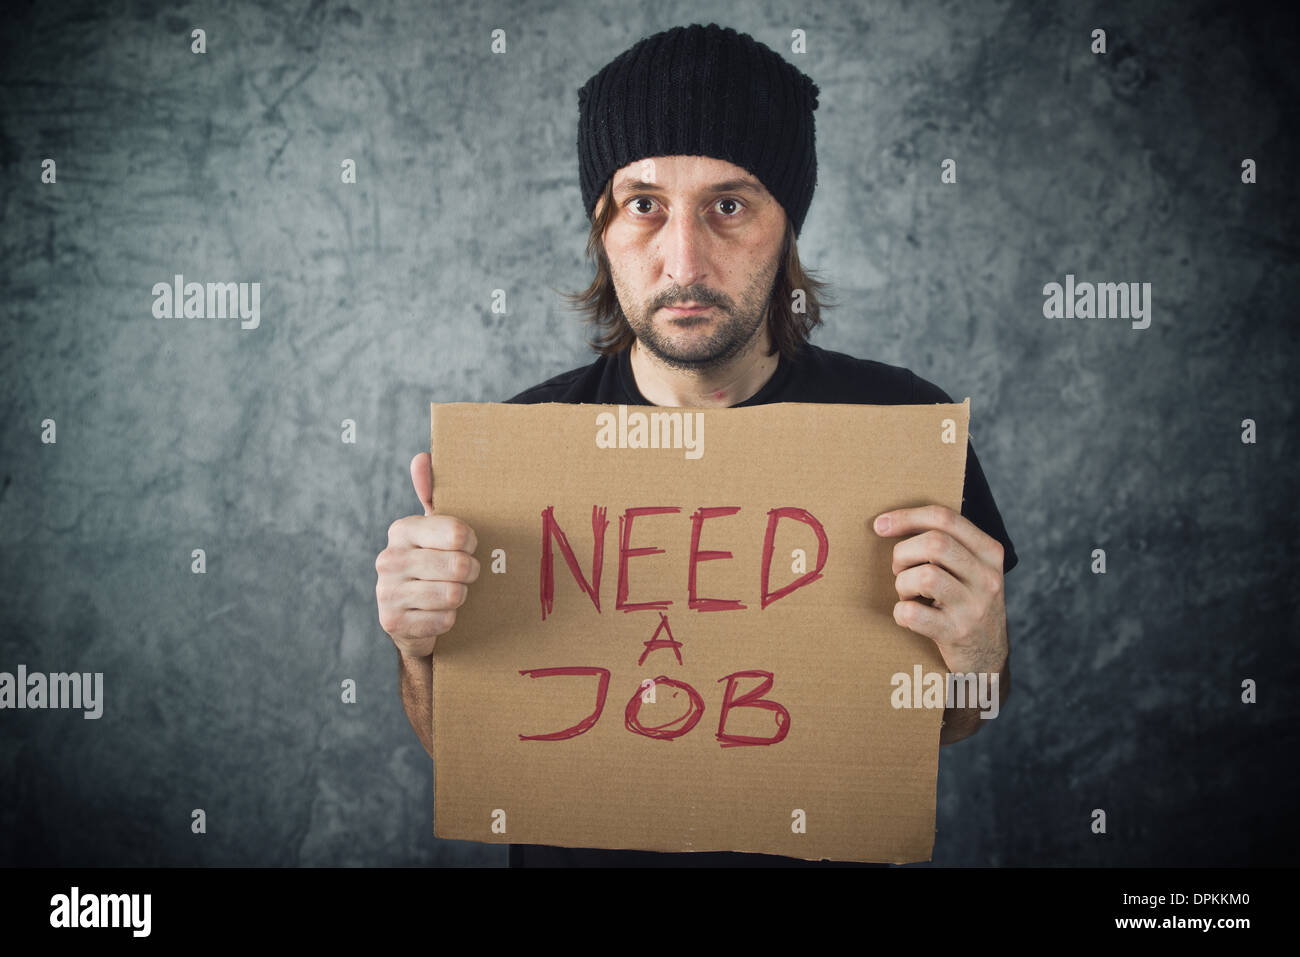 Man holding cardboard paper with Need a Job message. Job seeking, unemployment issues. Stock Photo